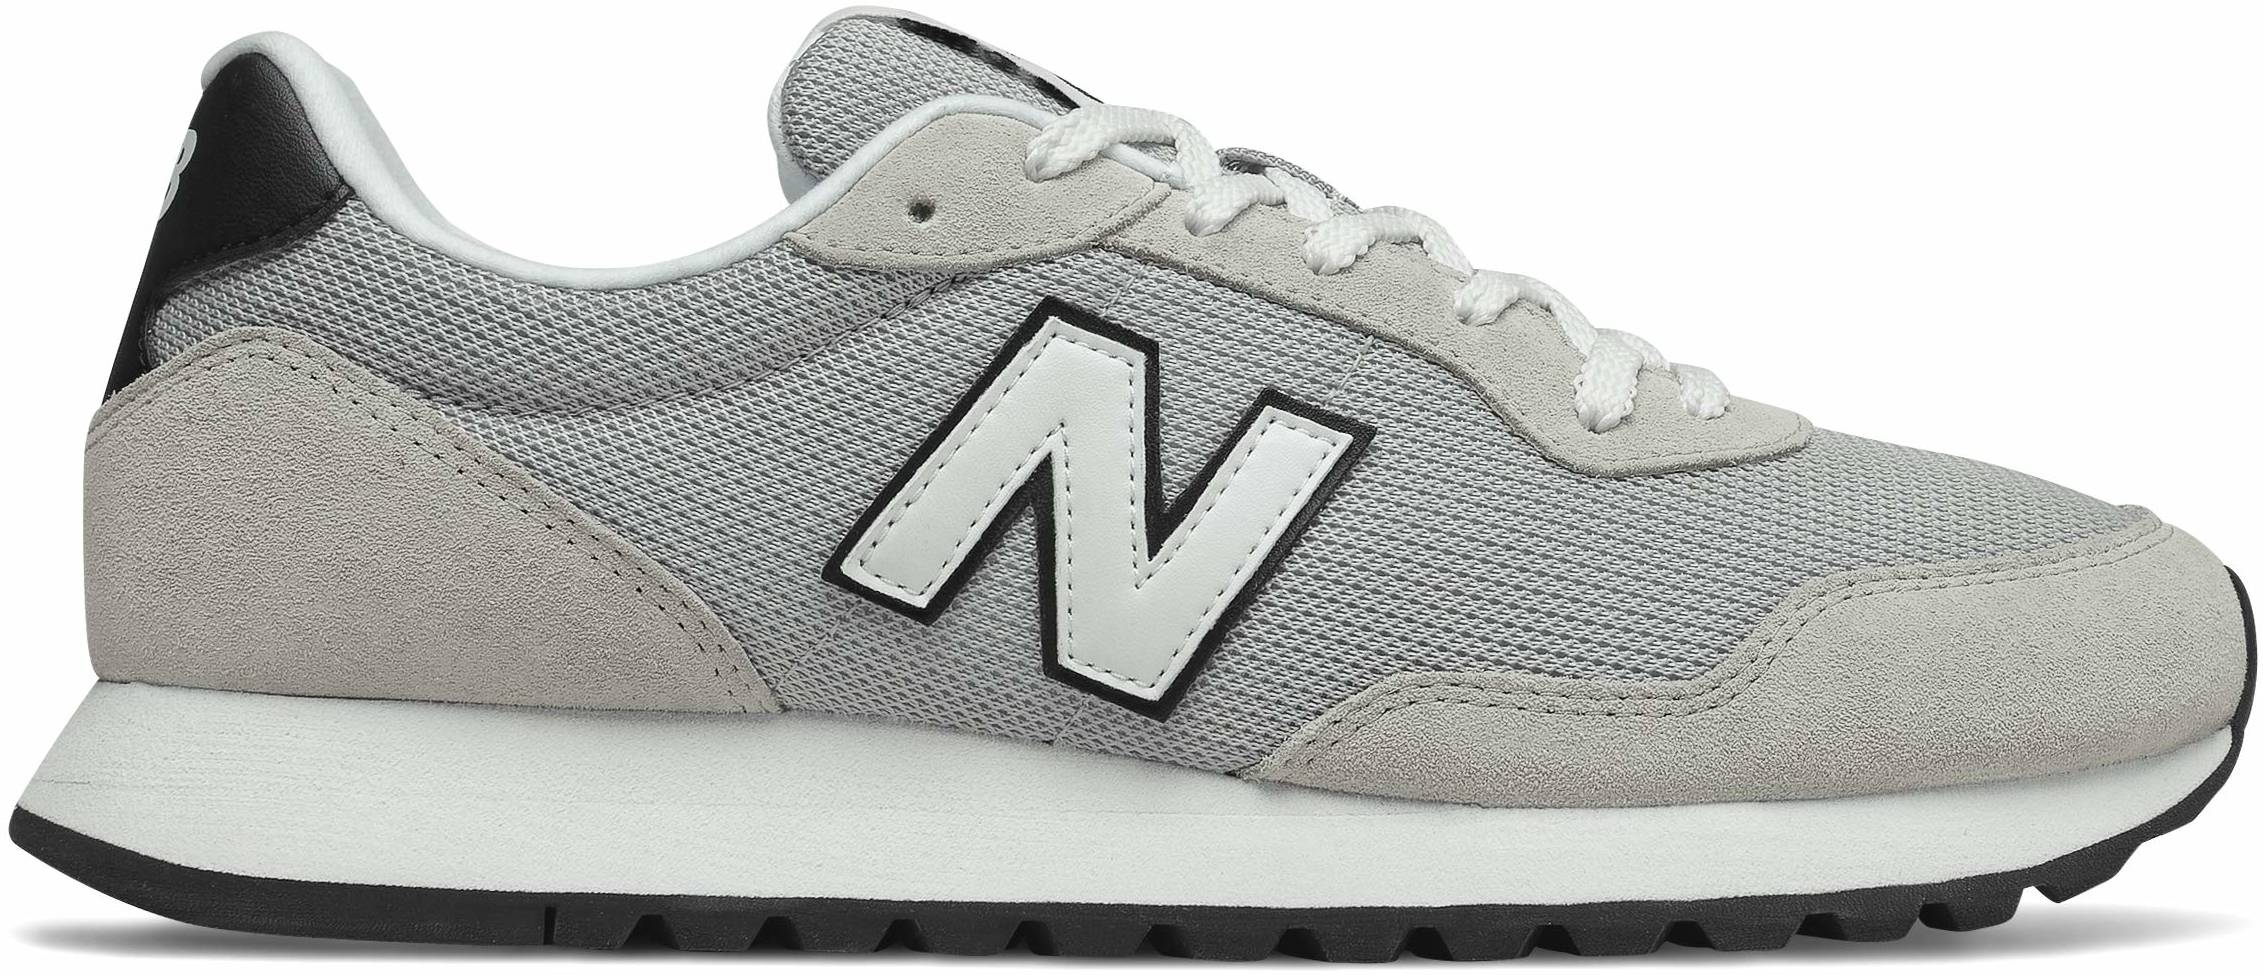 New Balance 527 sneakers in 10 colors (only $37) | RunRepeat